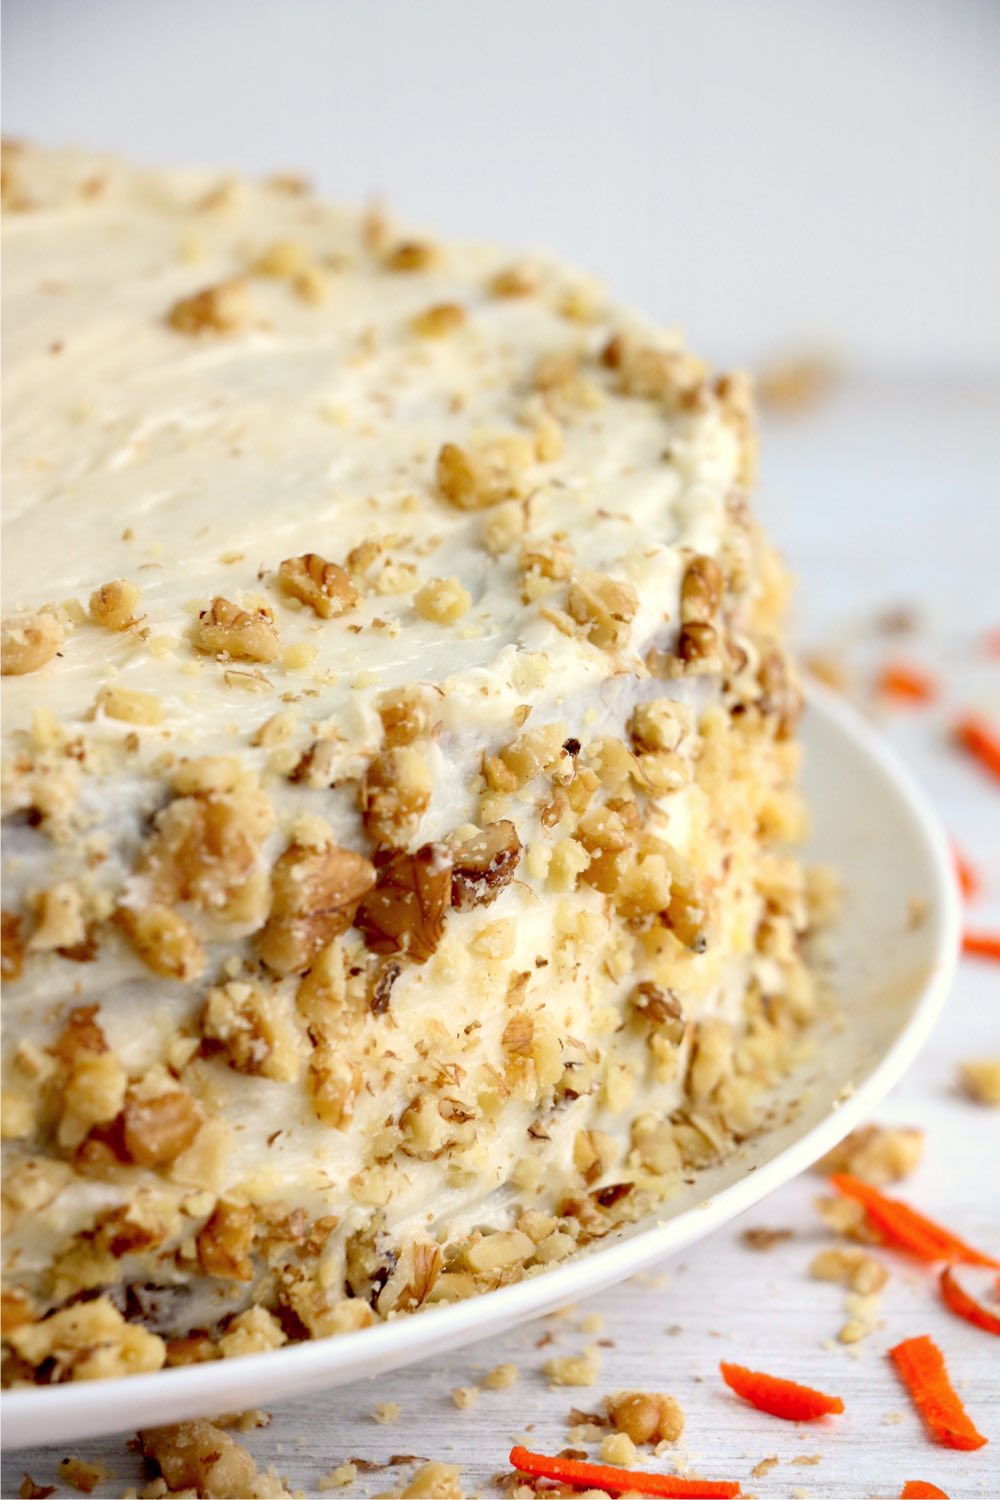 Carrot cake with chopped walnuts on the outside of cake